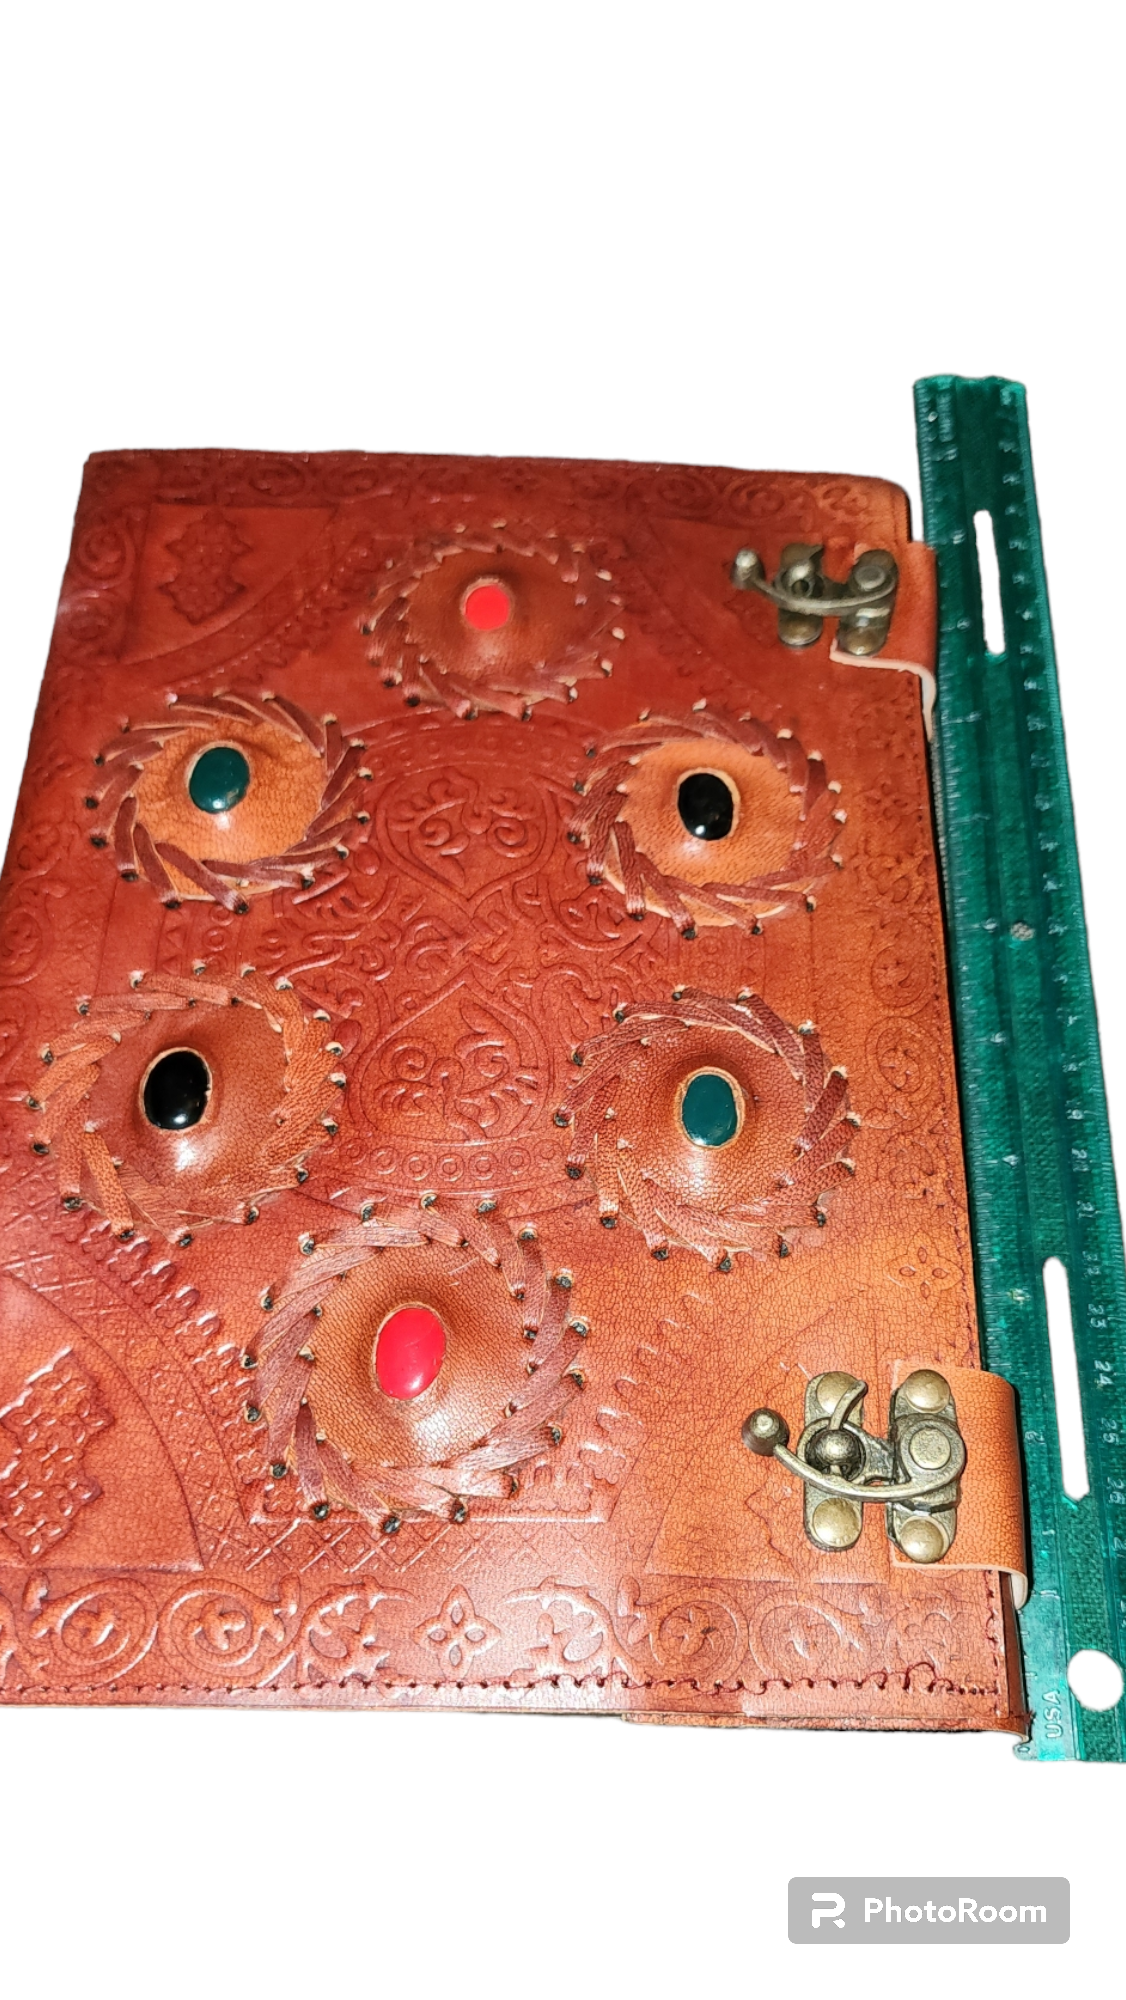 Large Mixed Gemstone Leather Notebook | Reiki Charged